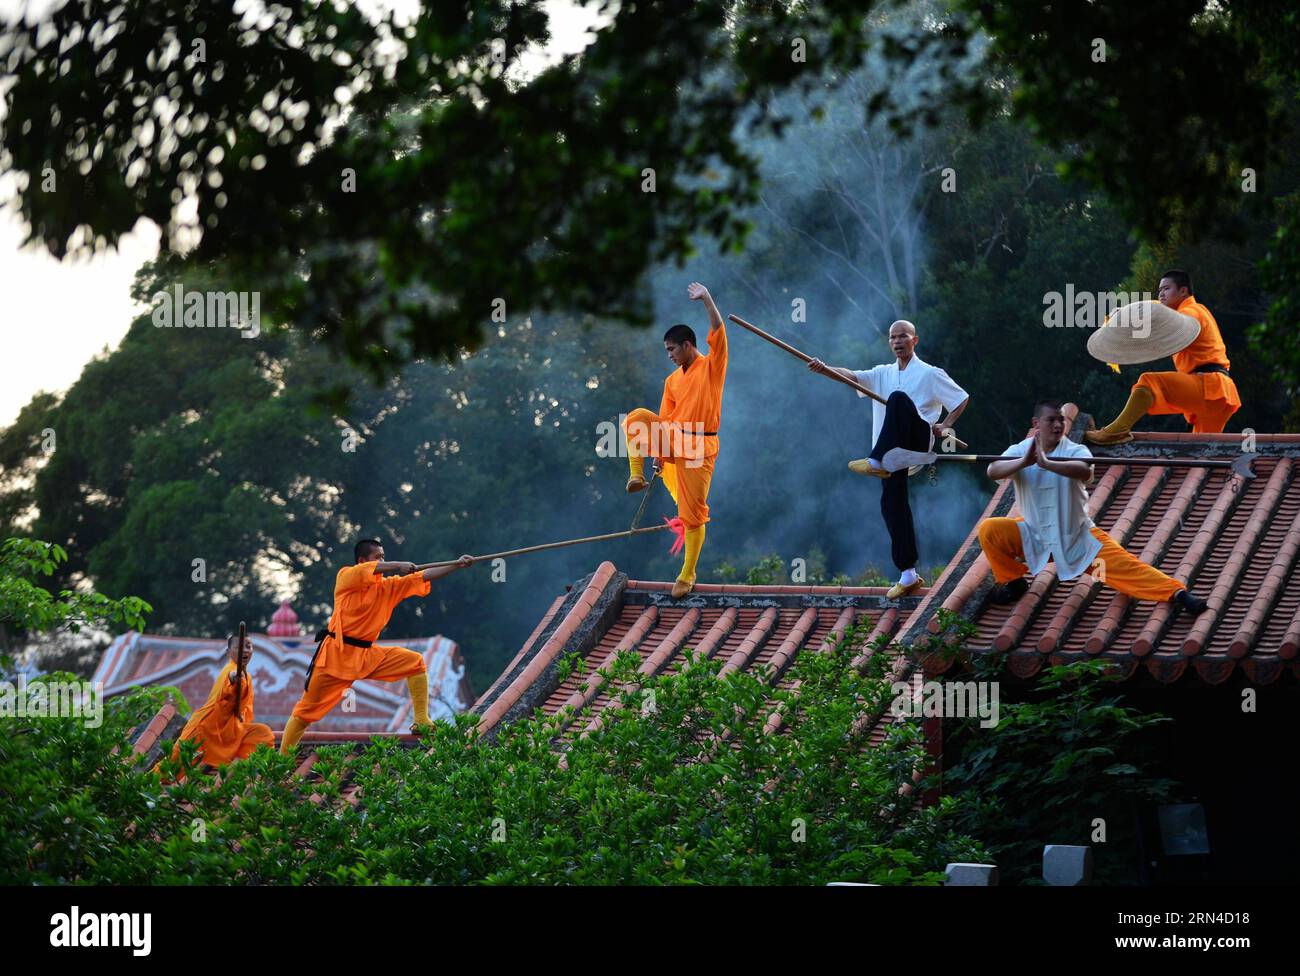 (150517) -- QUANZHOU, May 17, 2015 -- A monk practices martial art at the Quanzhou Shaolin Temple in Quanzhou City, southeast China s Fujian Province. Located in the east of the Qingyuan Mountain of Quanzhou, the Quanzhou Shaolin Temple, also called the South Shaolin Temple, is the birthplace of the South Shaolin martial art, which has spread to Taiwan, Hong Kong and Macao and even Southeast Asia since Ming (1368-1644) and Qing (1644-1911) dynasties. It s also jointly called the South and North Shaolin with Songshan Shaolin Temple in central China s Henan Province. Zen, the doctrine which ever Stock Photo